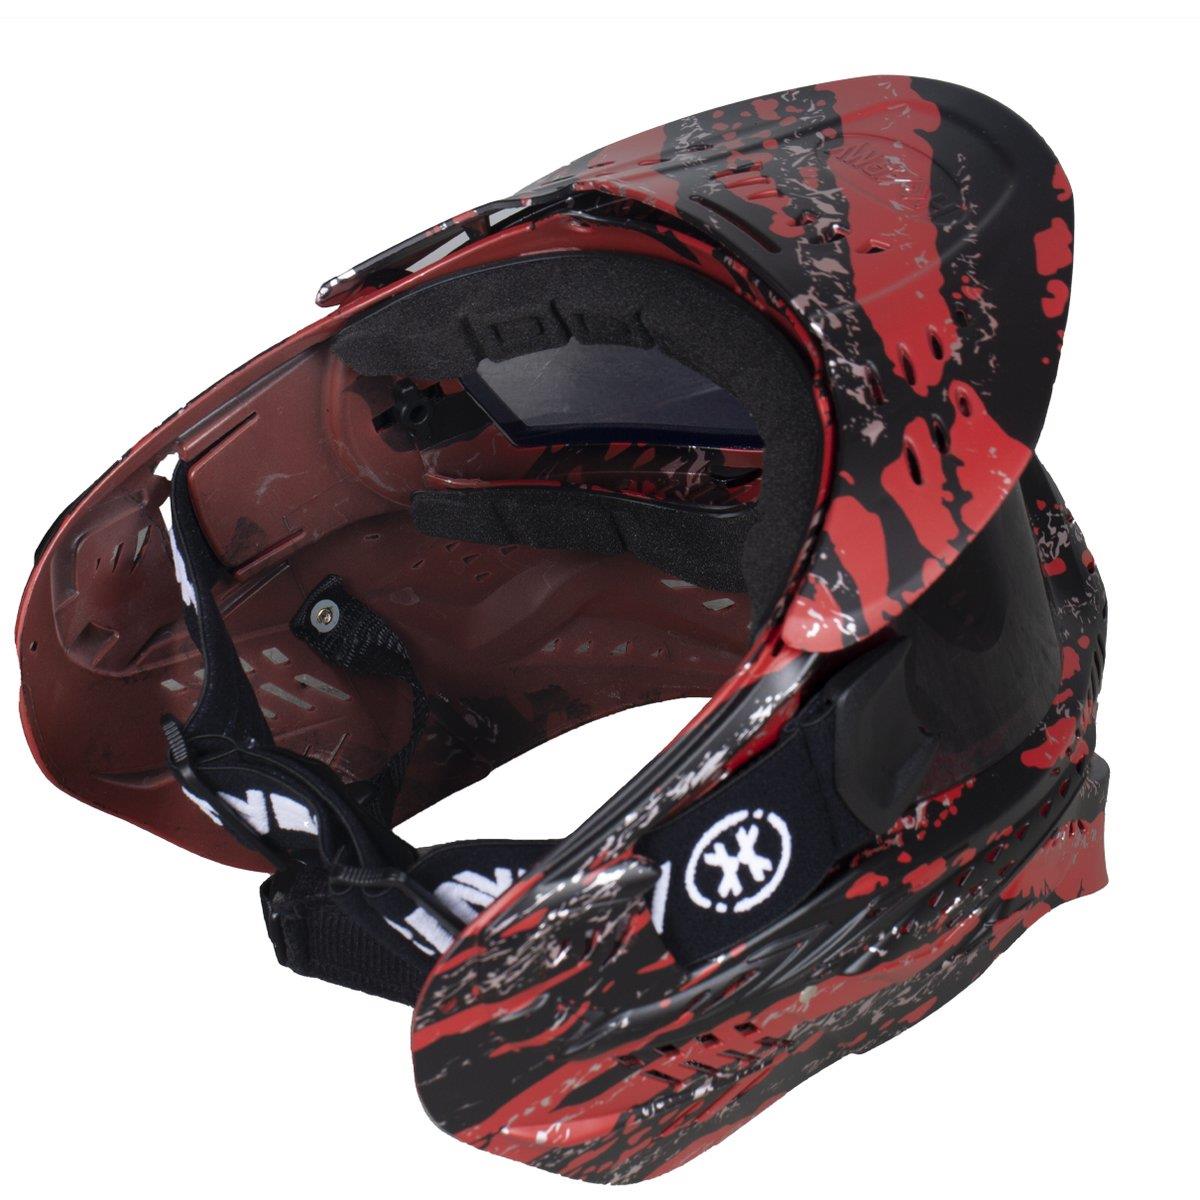 HK Army HSTL Goggle Thermal Dual Paned Paintball Mask - Fracture Black/Red HK Army